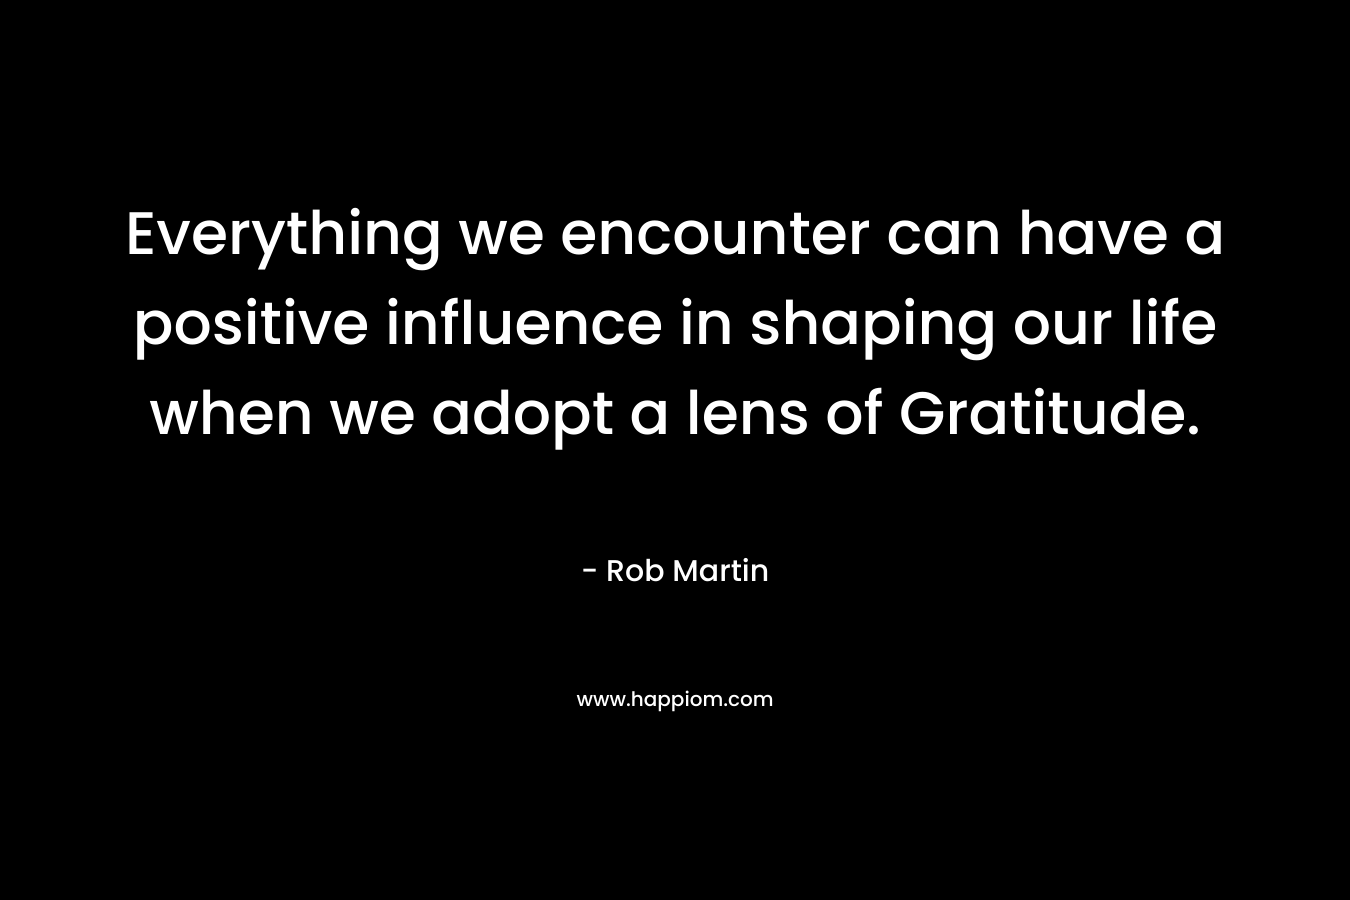 Everything we encounter can have a positive influence in shaping our life when we adopt a lens of Gratitude. – Rob Martin